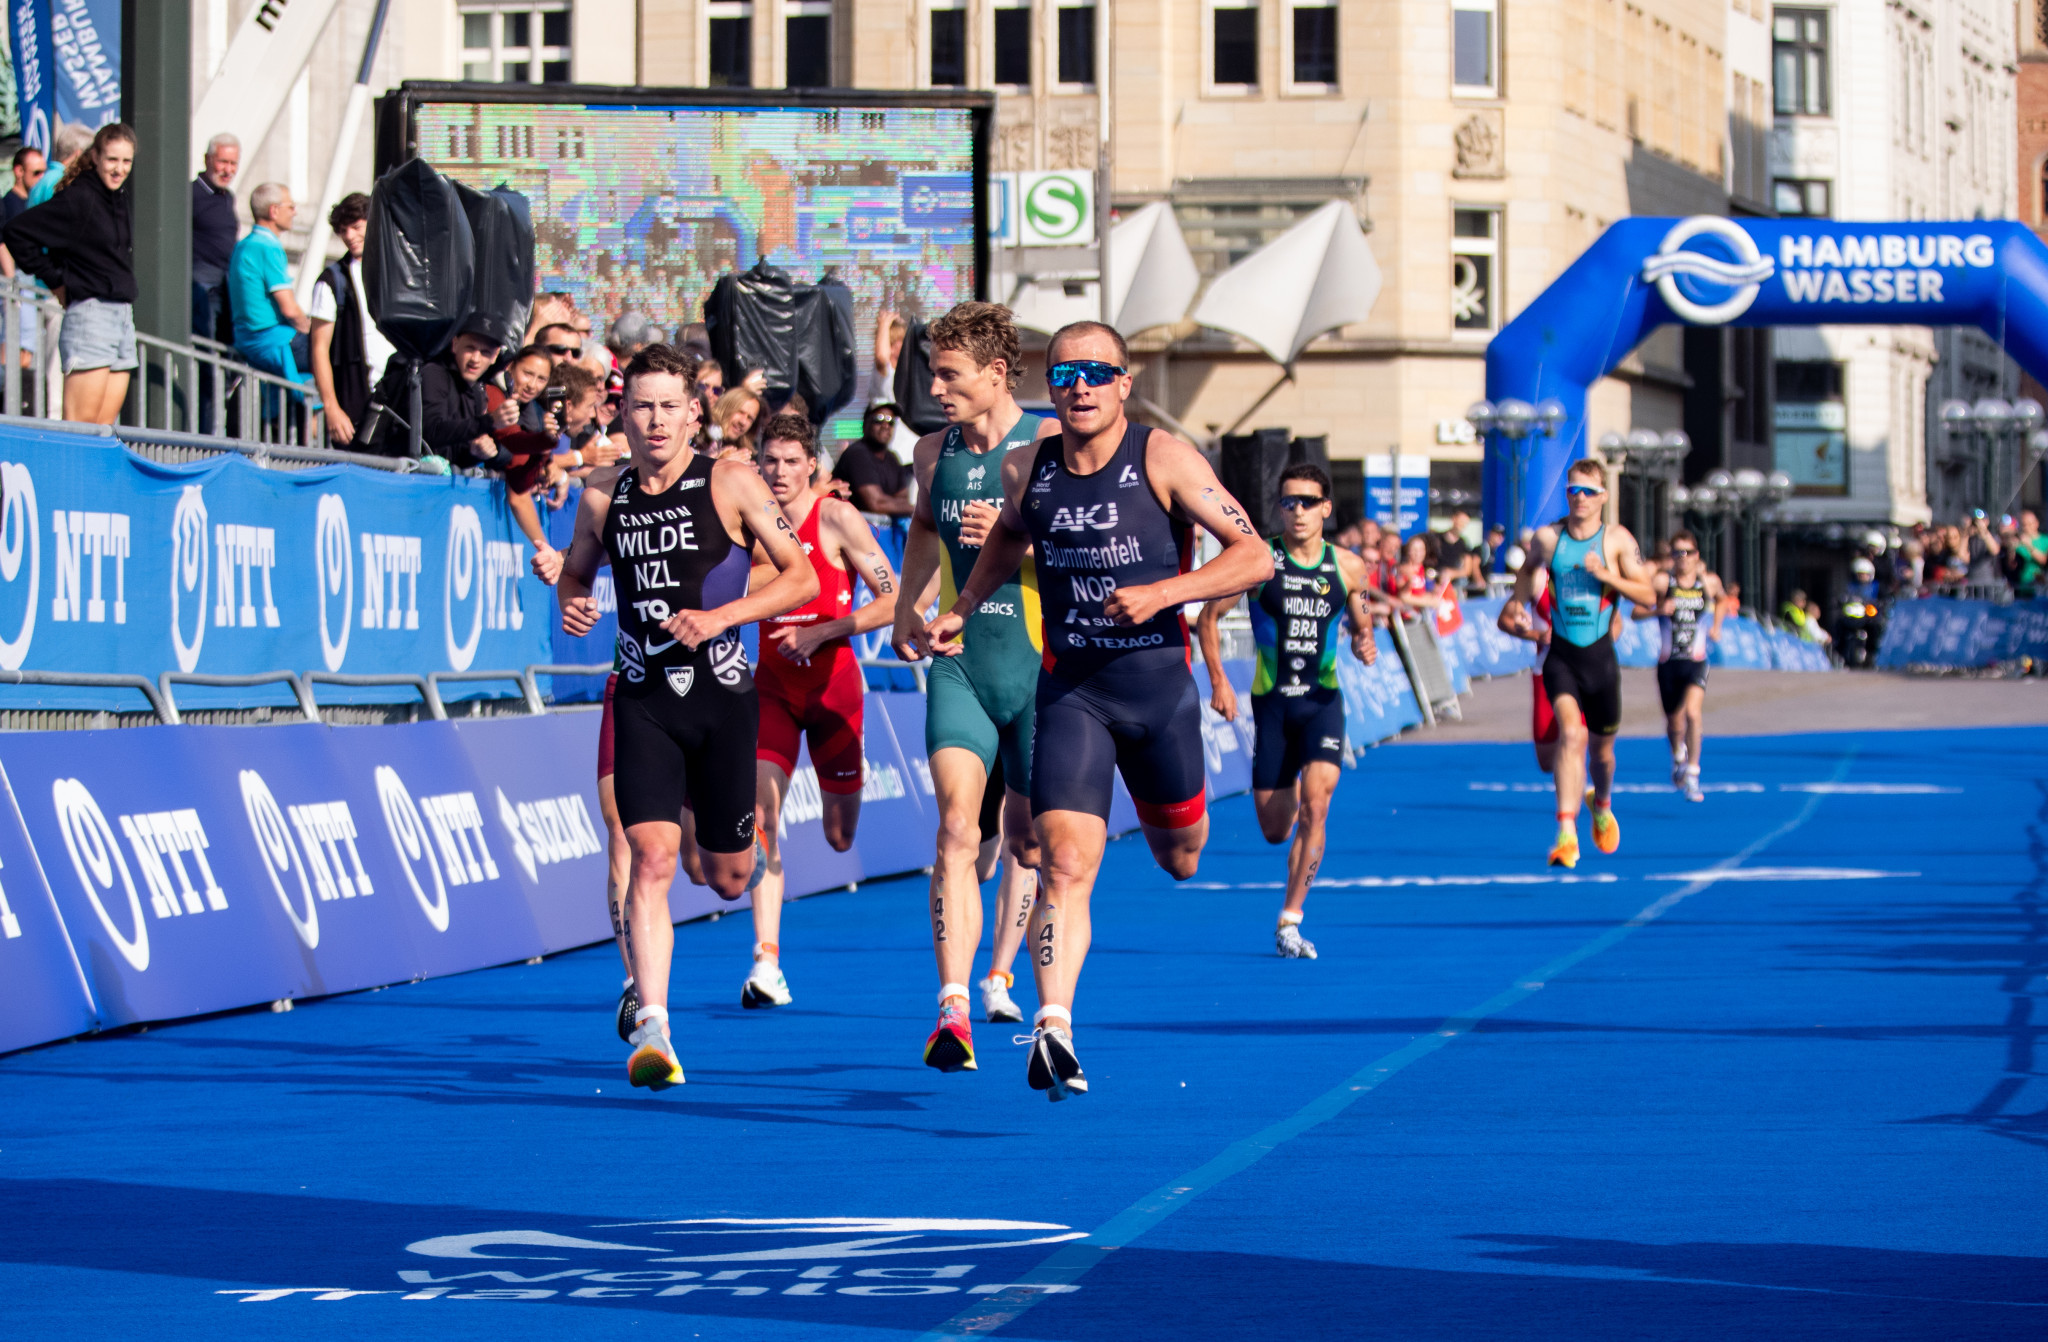 Norway's Tokyo 2020 Olympic champion was in blistering form as he crossed the line after 19:45 ©World Triathlon